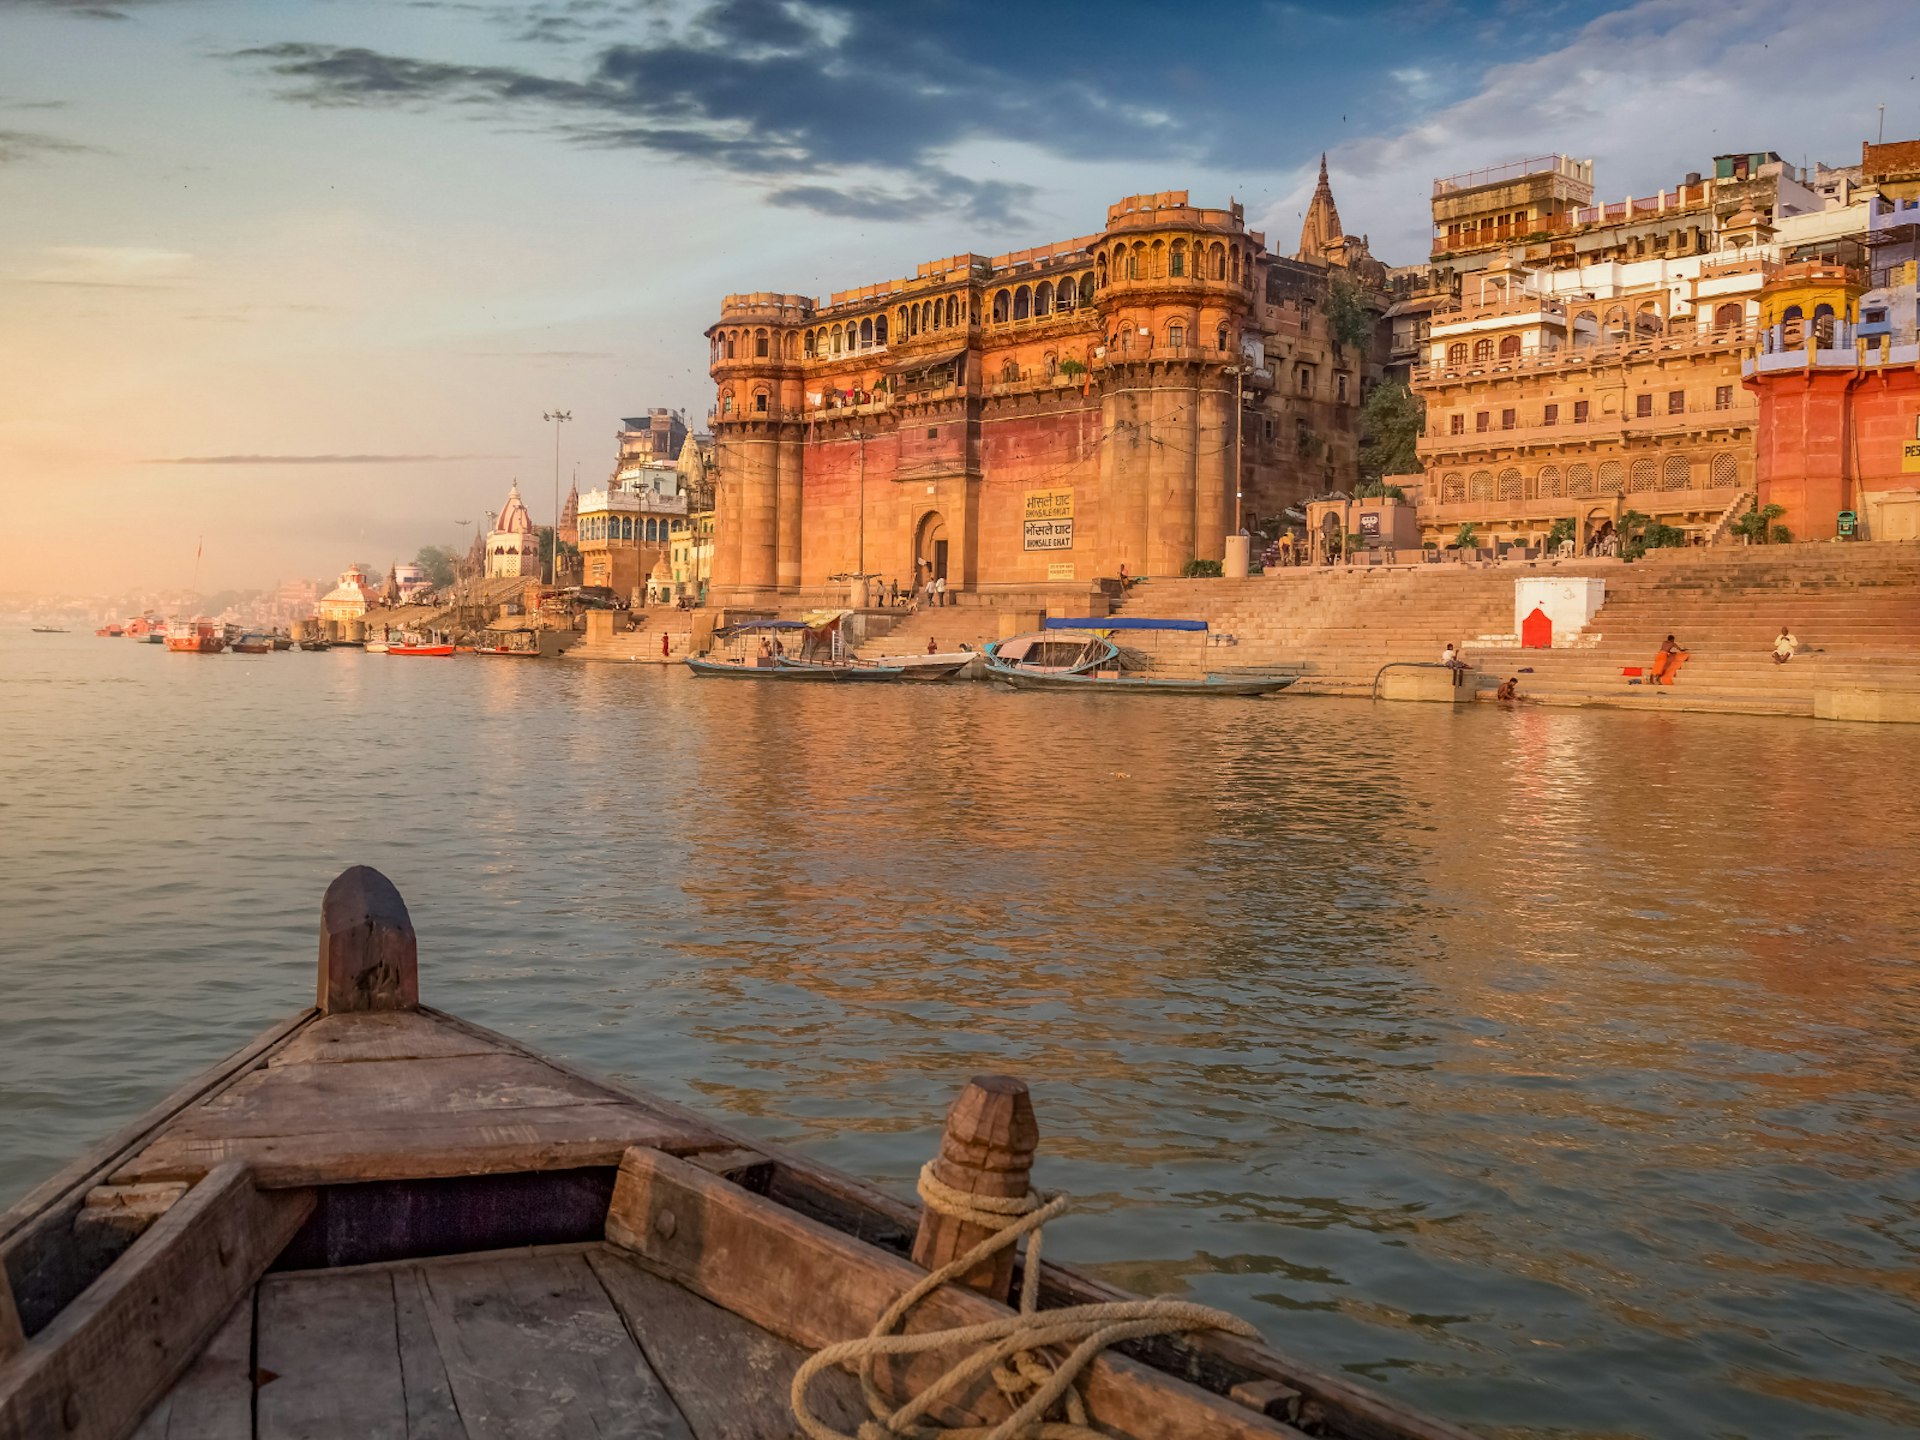 The ghats of Varanasi seen from the Ganges River